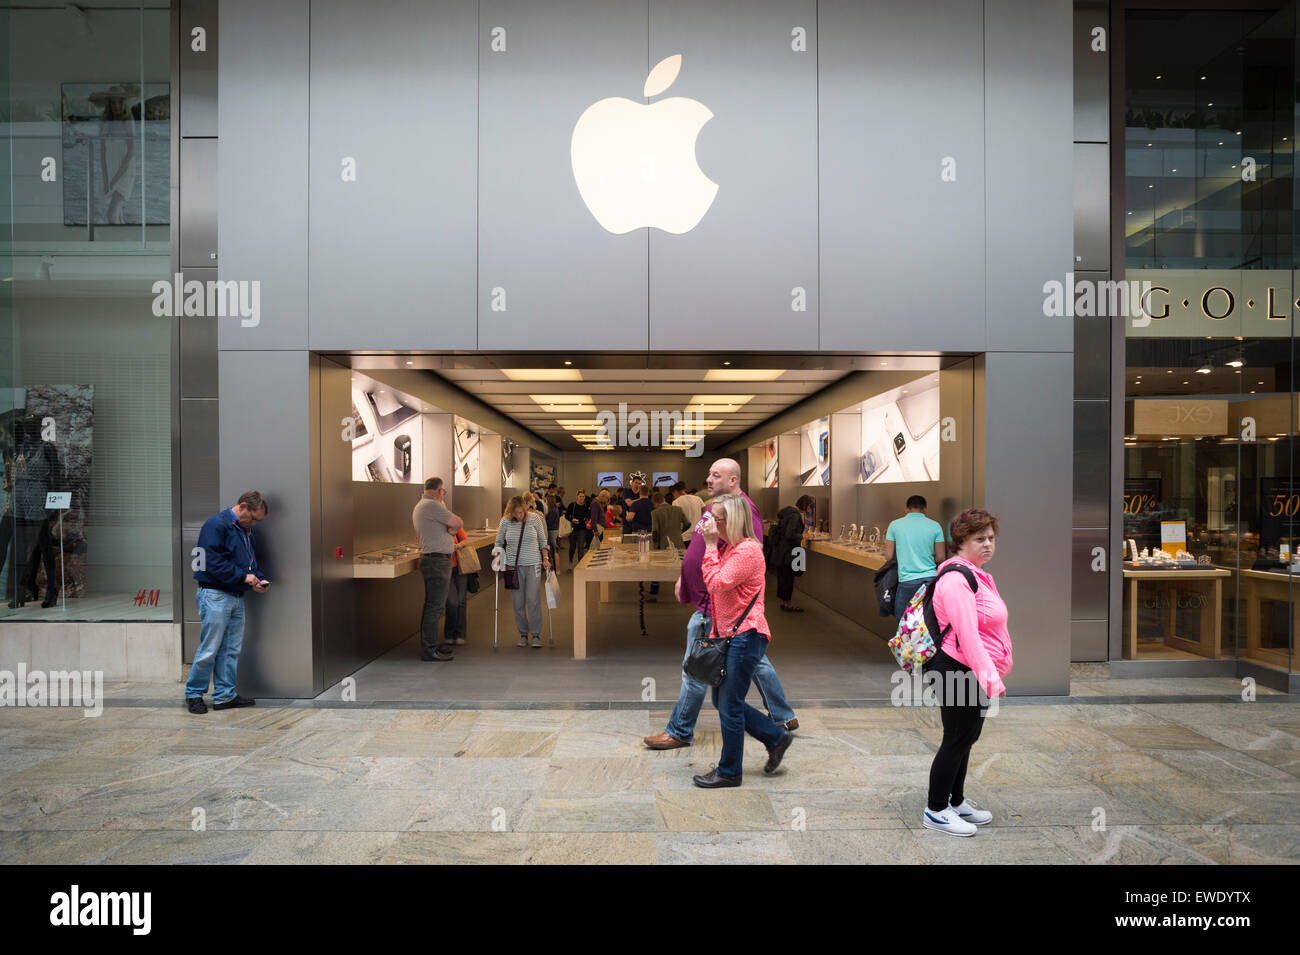 Apple store in West Quay shopping centre in Southampton UK Stock Photo